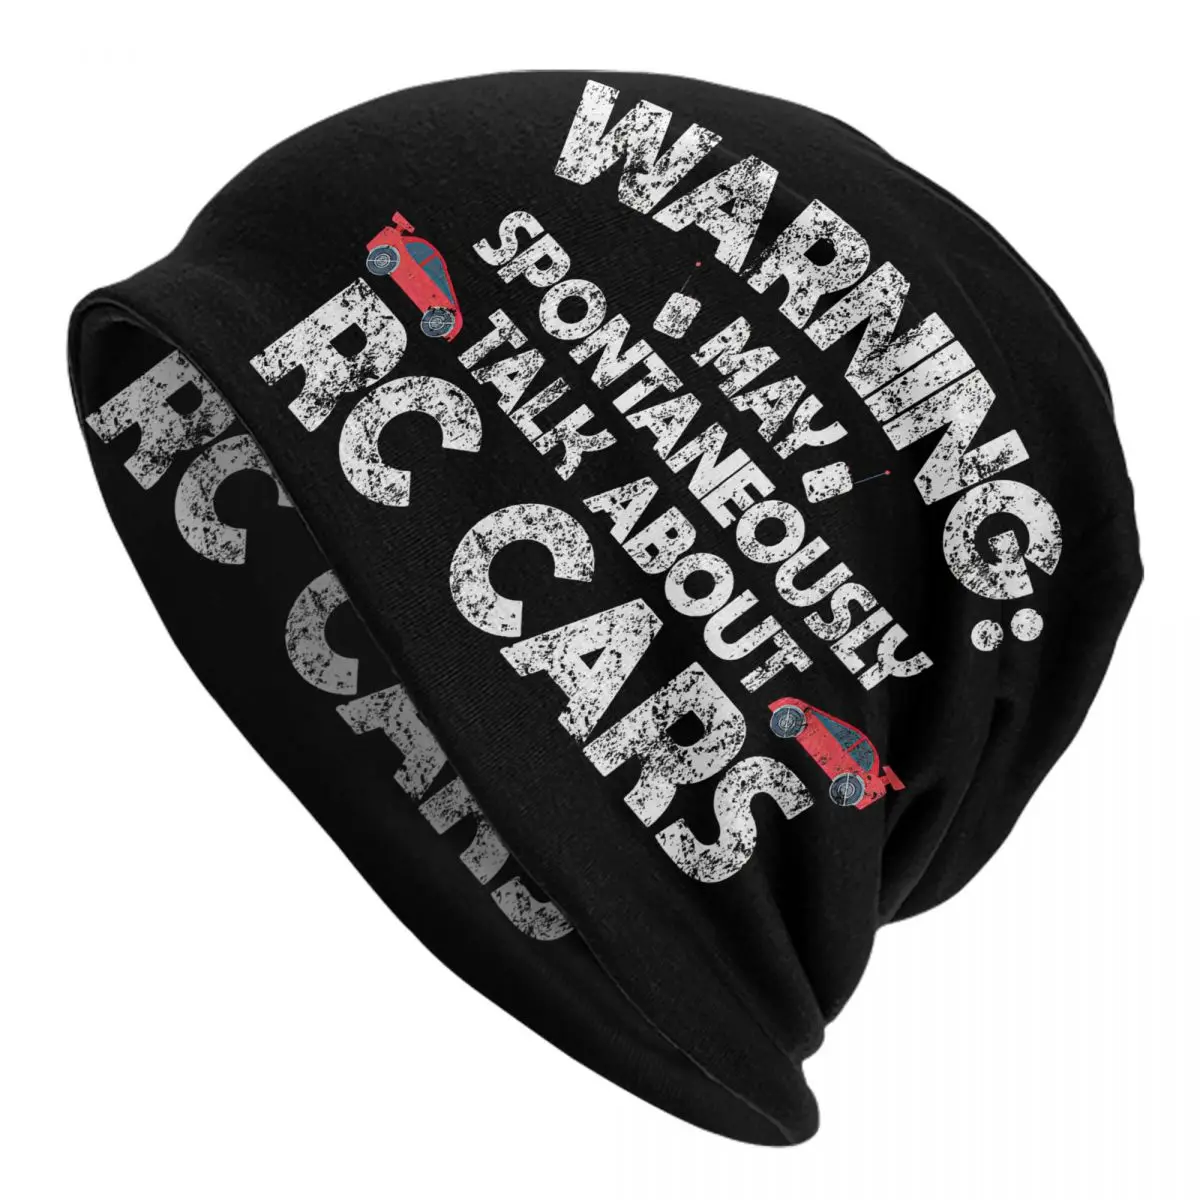 Funny RC Car Apparel Adult Men's Women's Knit Hat Keep warm winter knitted hat